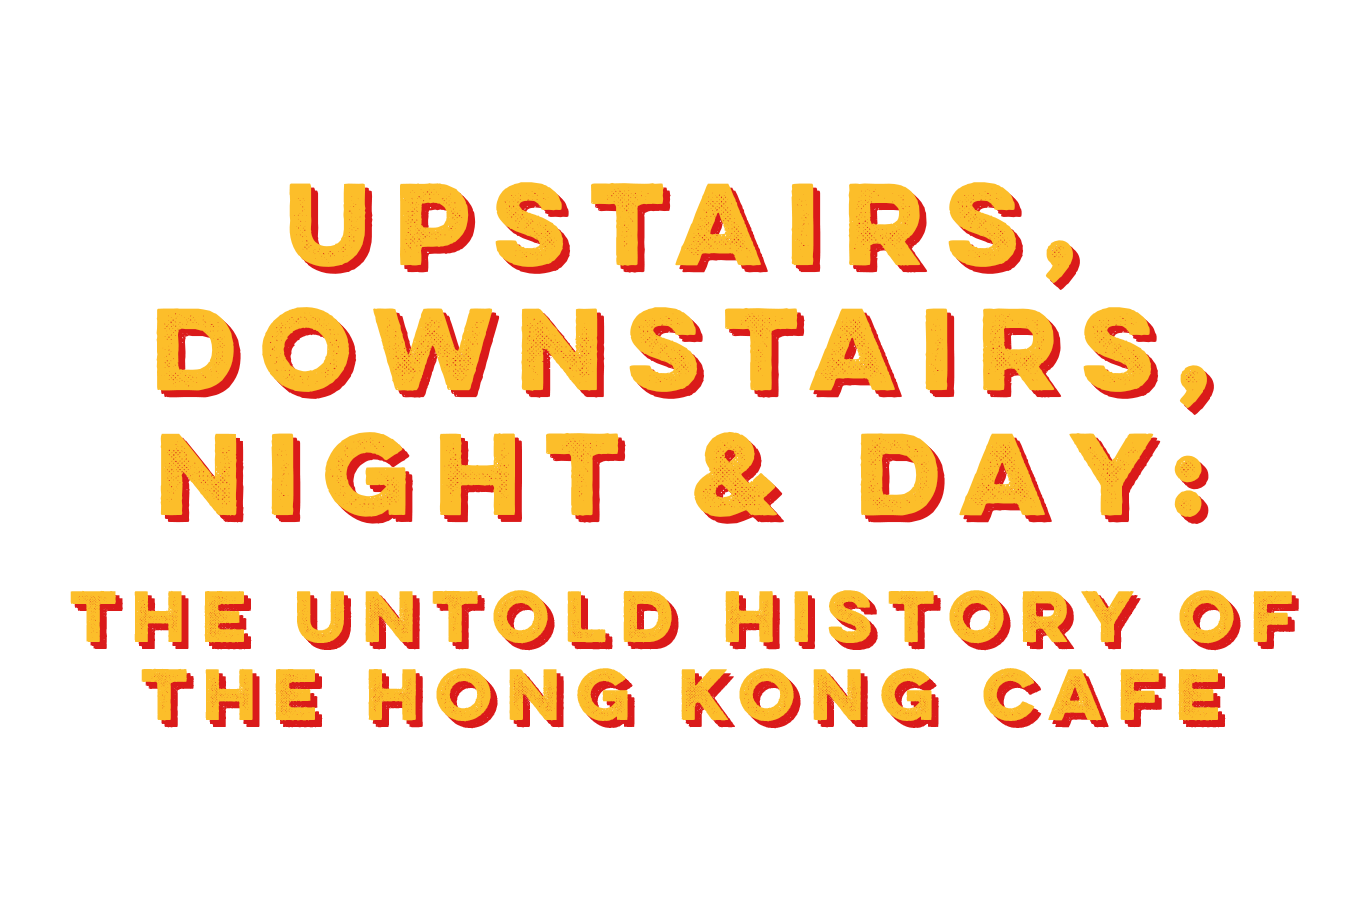 Upstairs, Downstairs, Night & Day: The Untold History of the Hong Kong Cafe